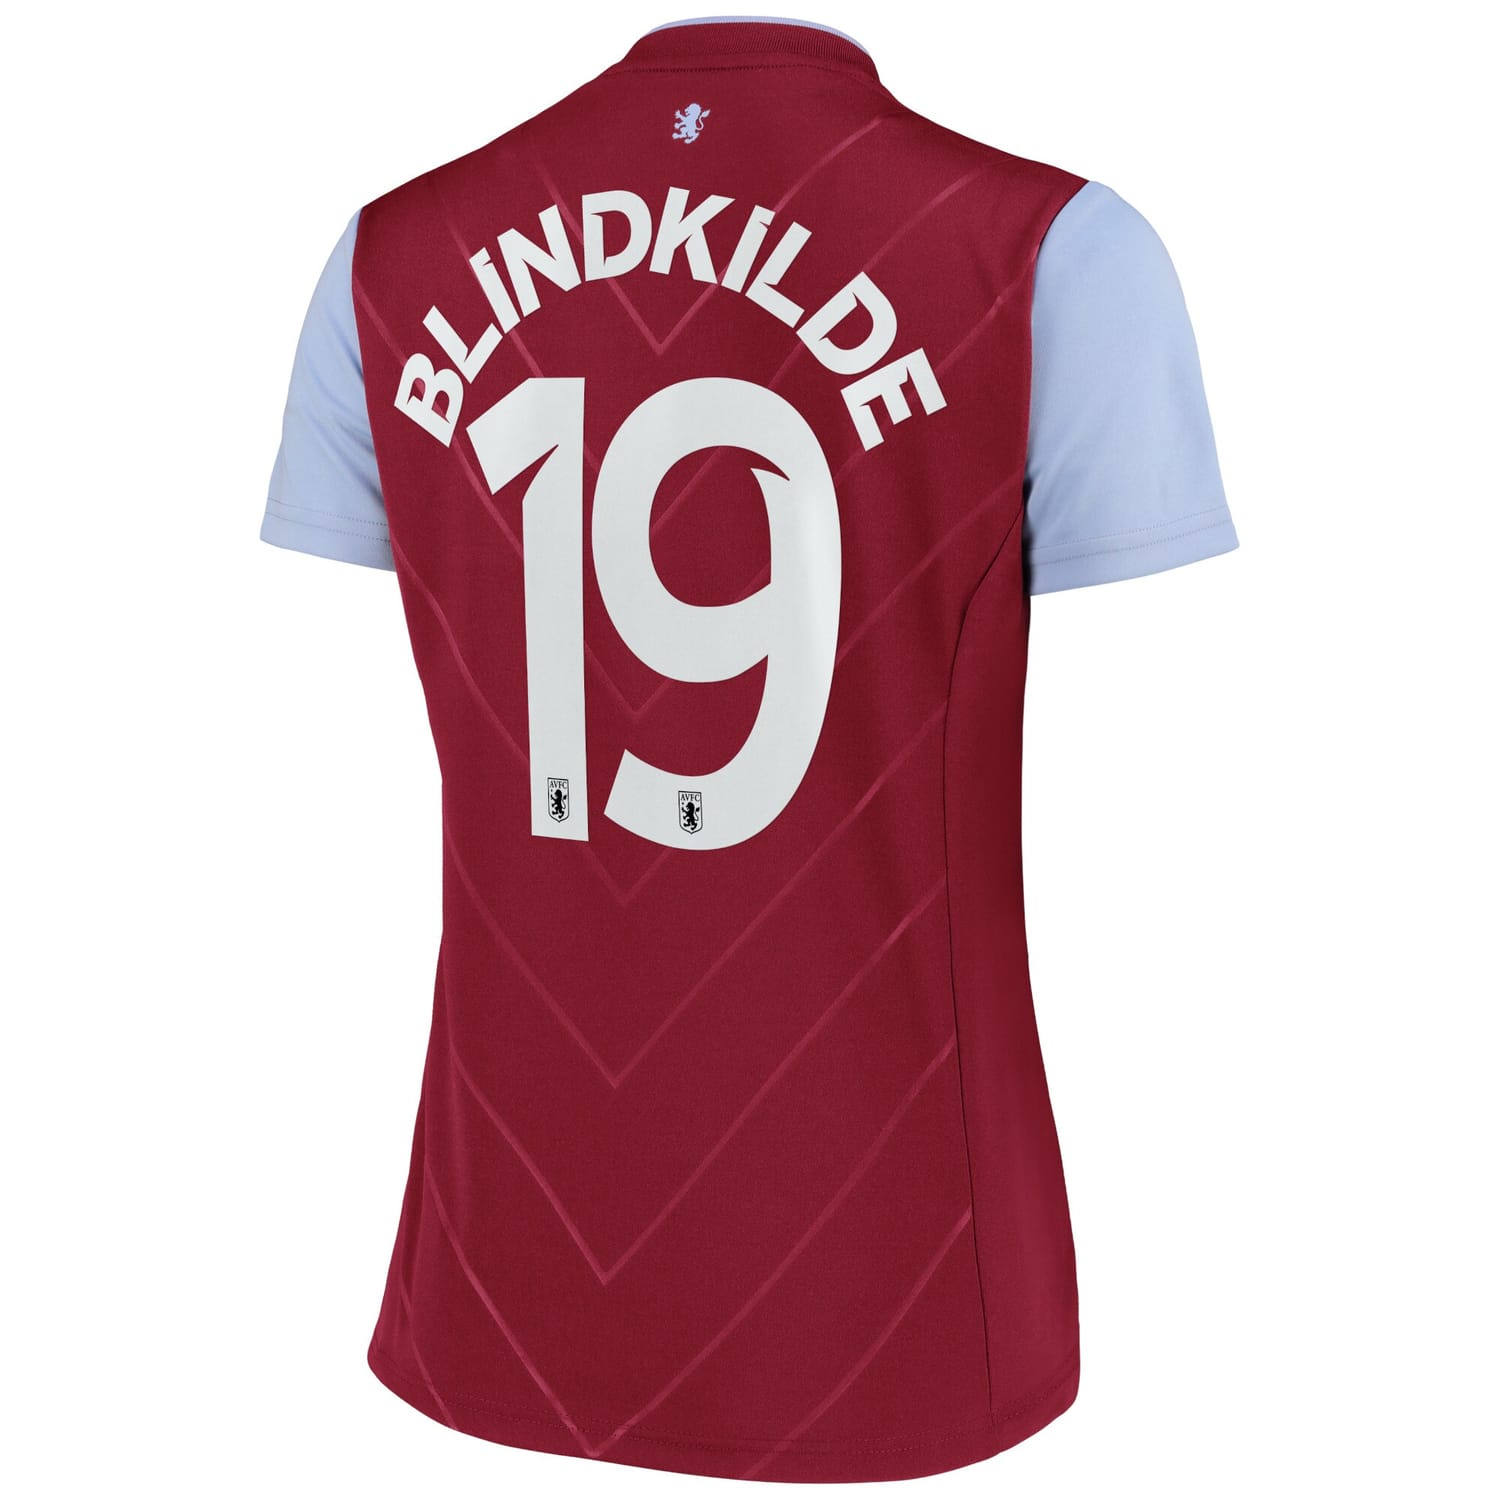 Premier League Aston Villa Home Cup Jersey Shirt 2022-23 player Laura Blindkilde 19 printing for Women